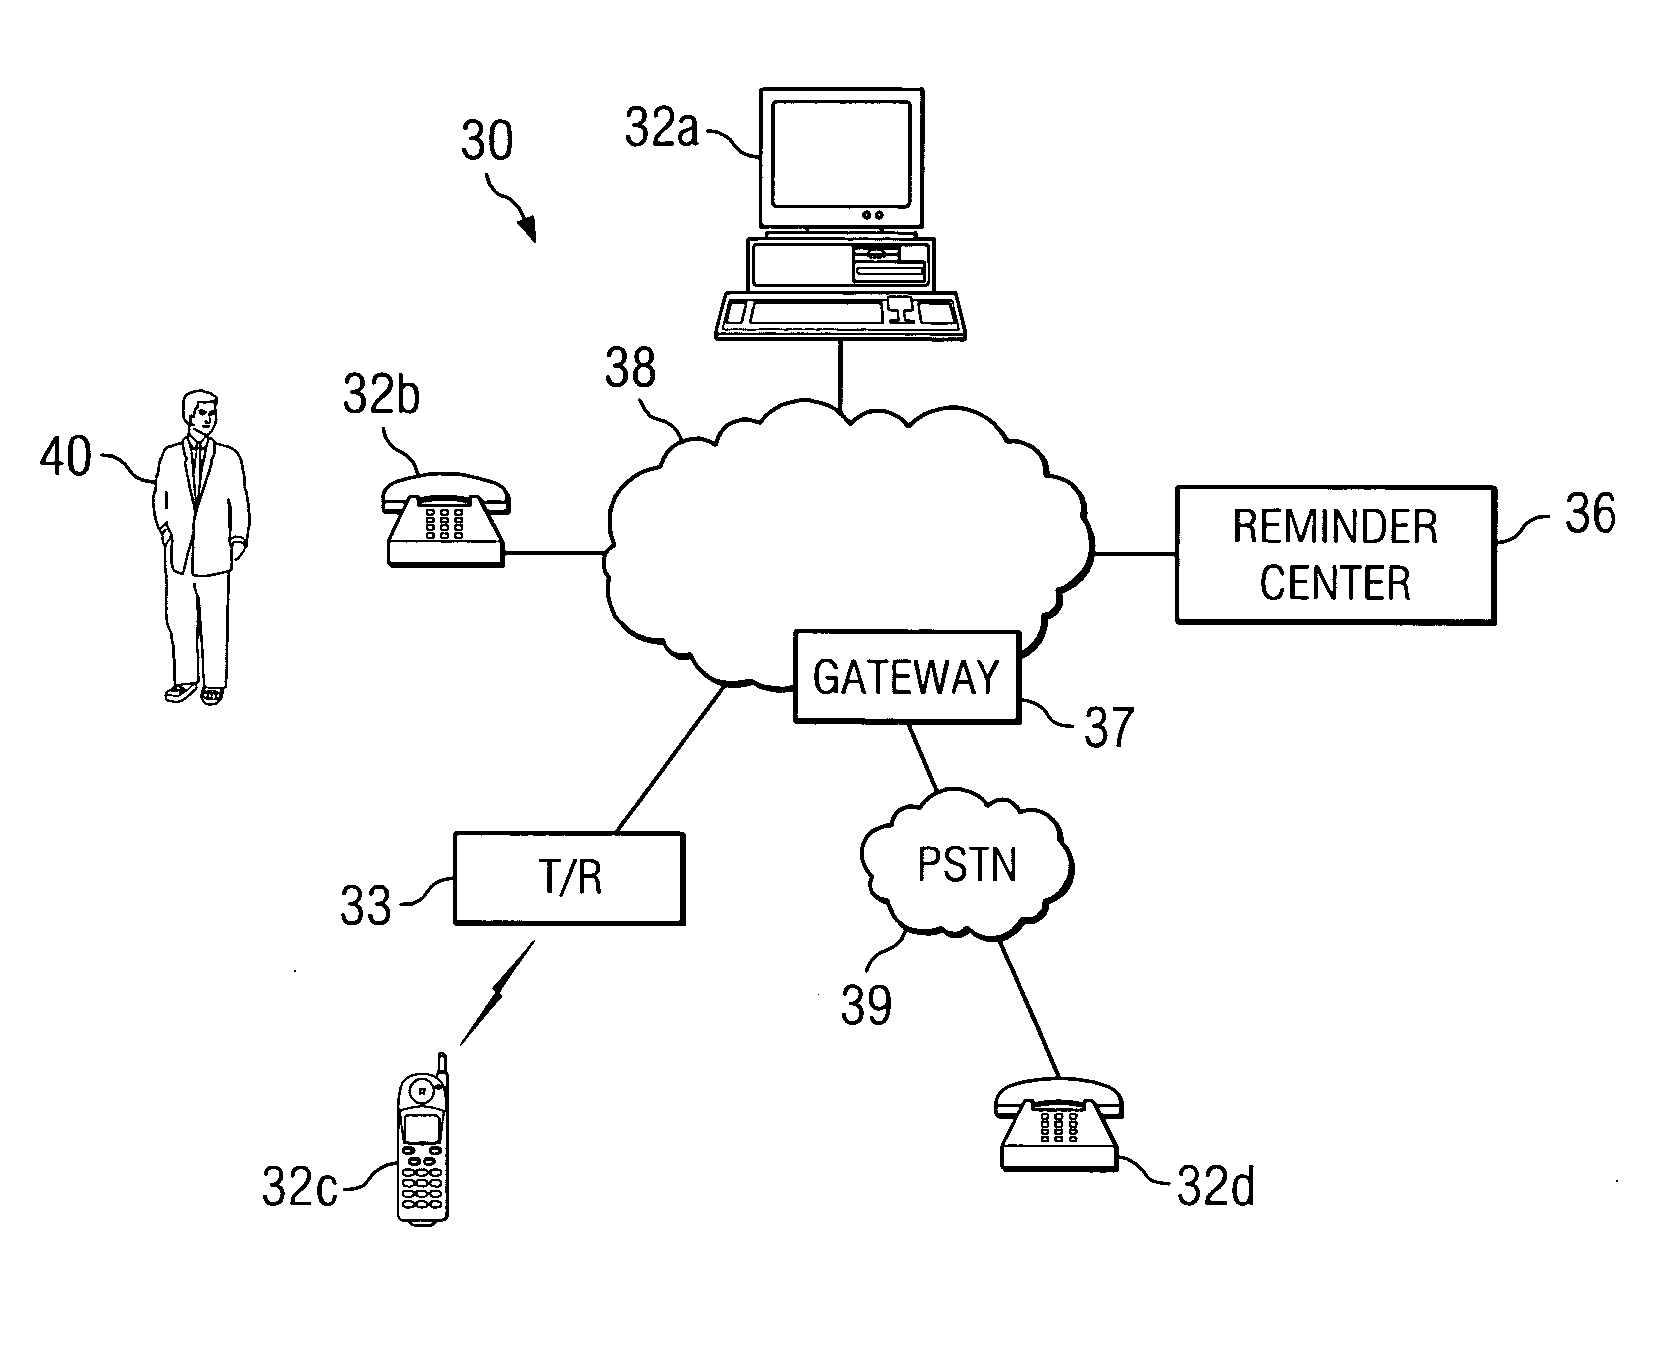 System and method for voice scheduling and multimedia alerting